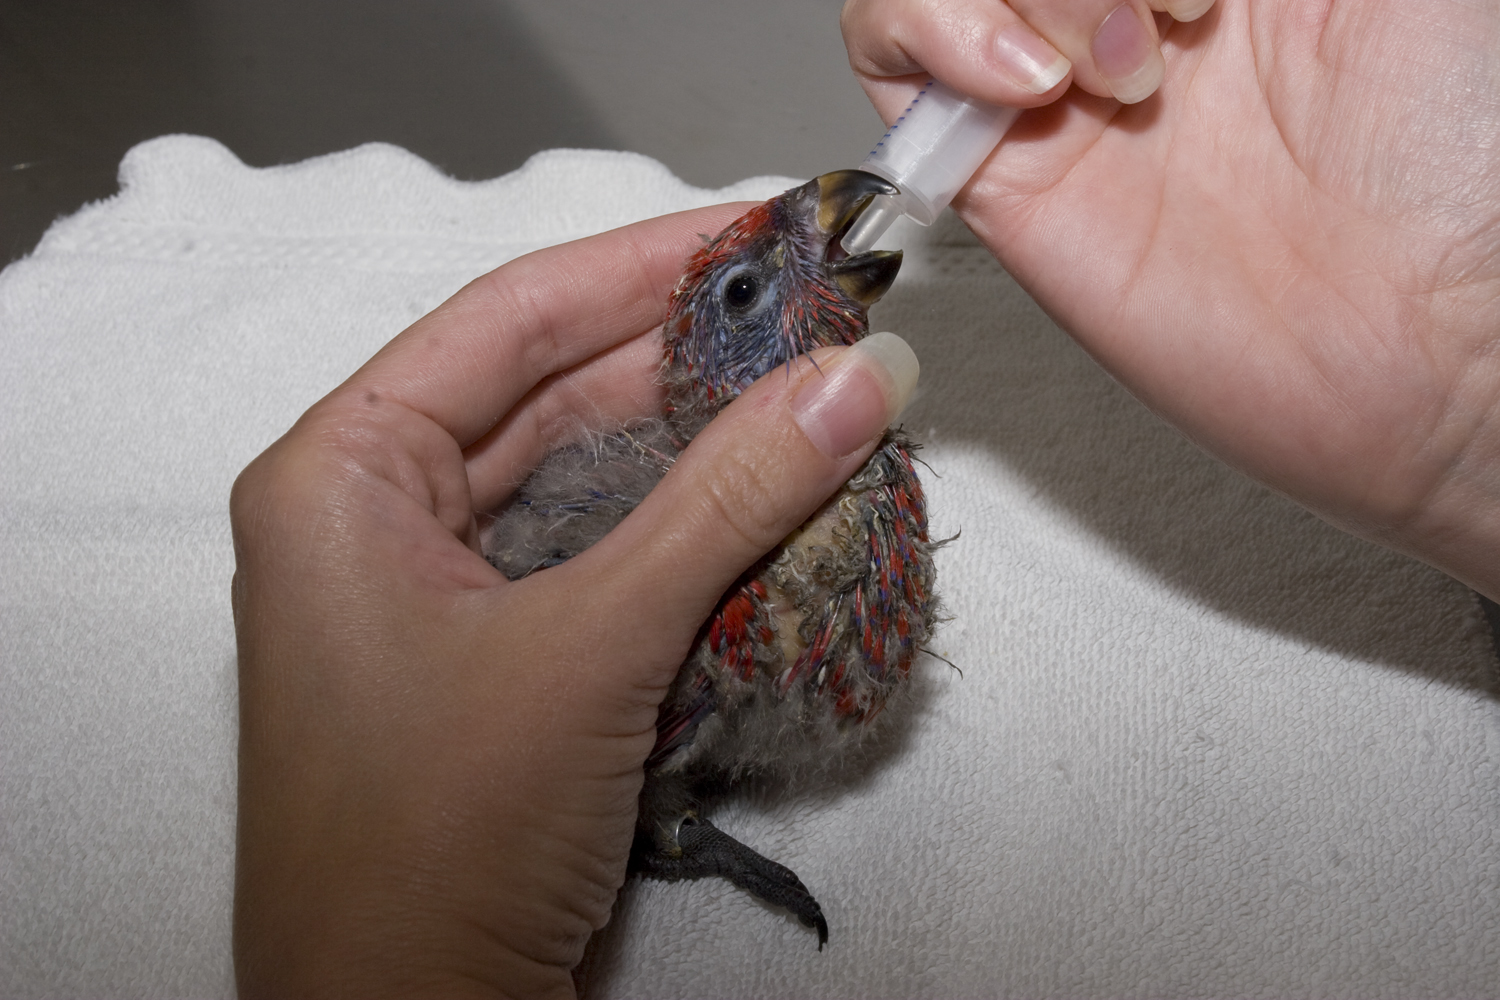 Feeding baby birds takes extensive knowledge of all the different species, skill, patience, and a firm but delicate hand—a challenging, but rewarding, job indeed!